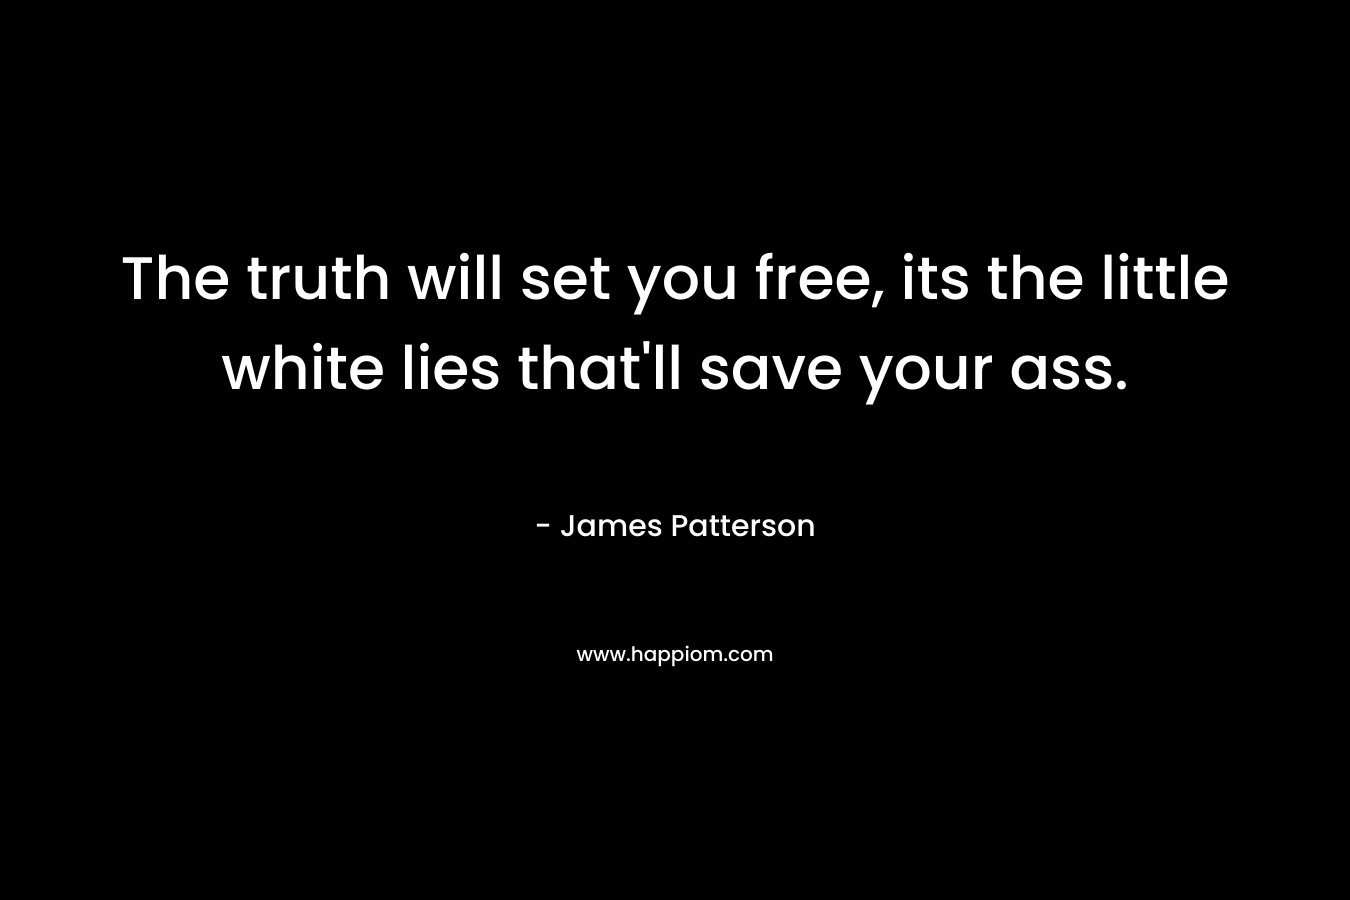 The truth will set you free, its the little white lies that'll save your ass.